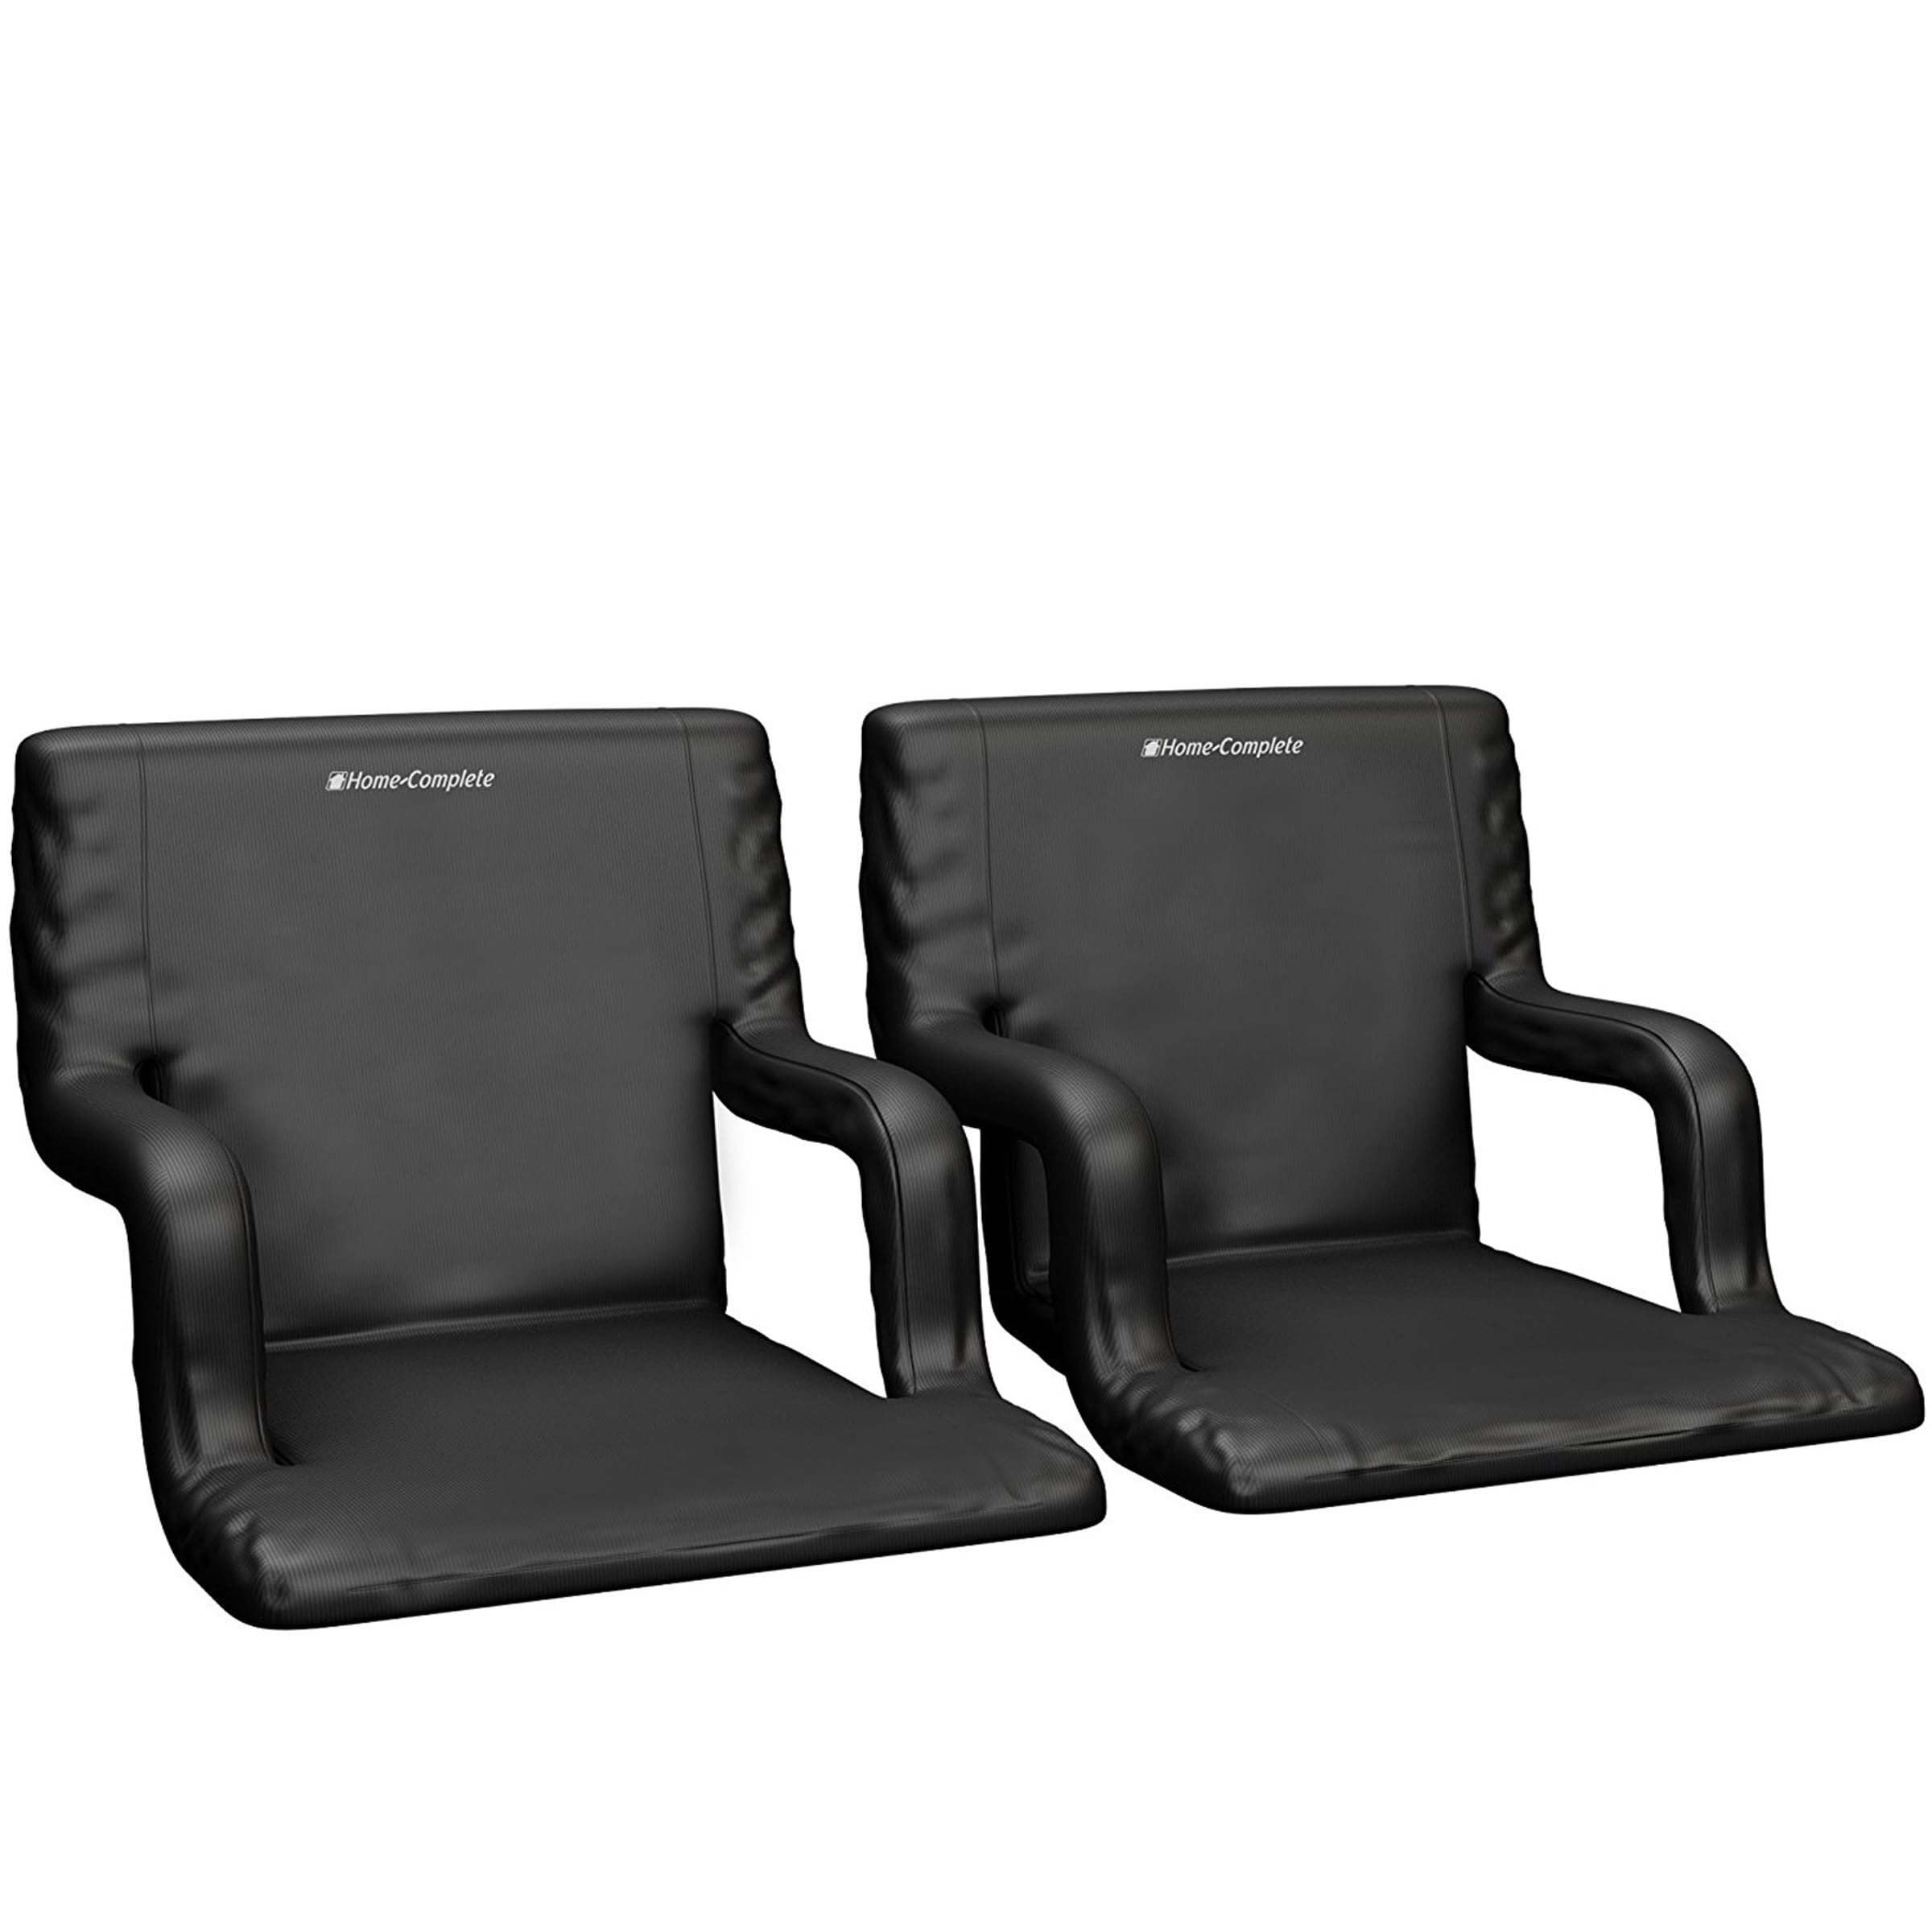 https://ak1.ostkcdn.com/images/products/is/images/direct/554581dbde894c9c0d1b95b4b35a16b40c40ea96/Stadium-Seat-Chair-2-Pack-Bleacher-Cushions-with-Padded-Back-Support-By-Home-Complete.jpg